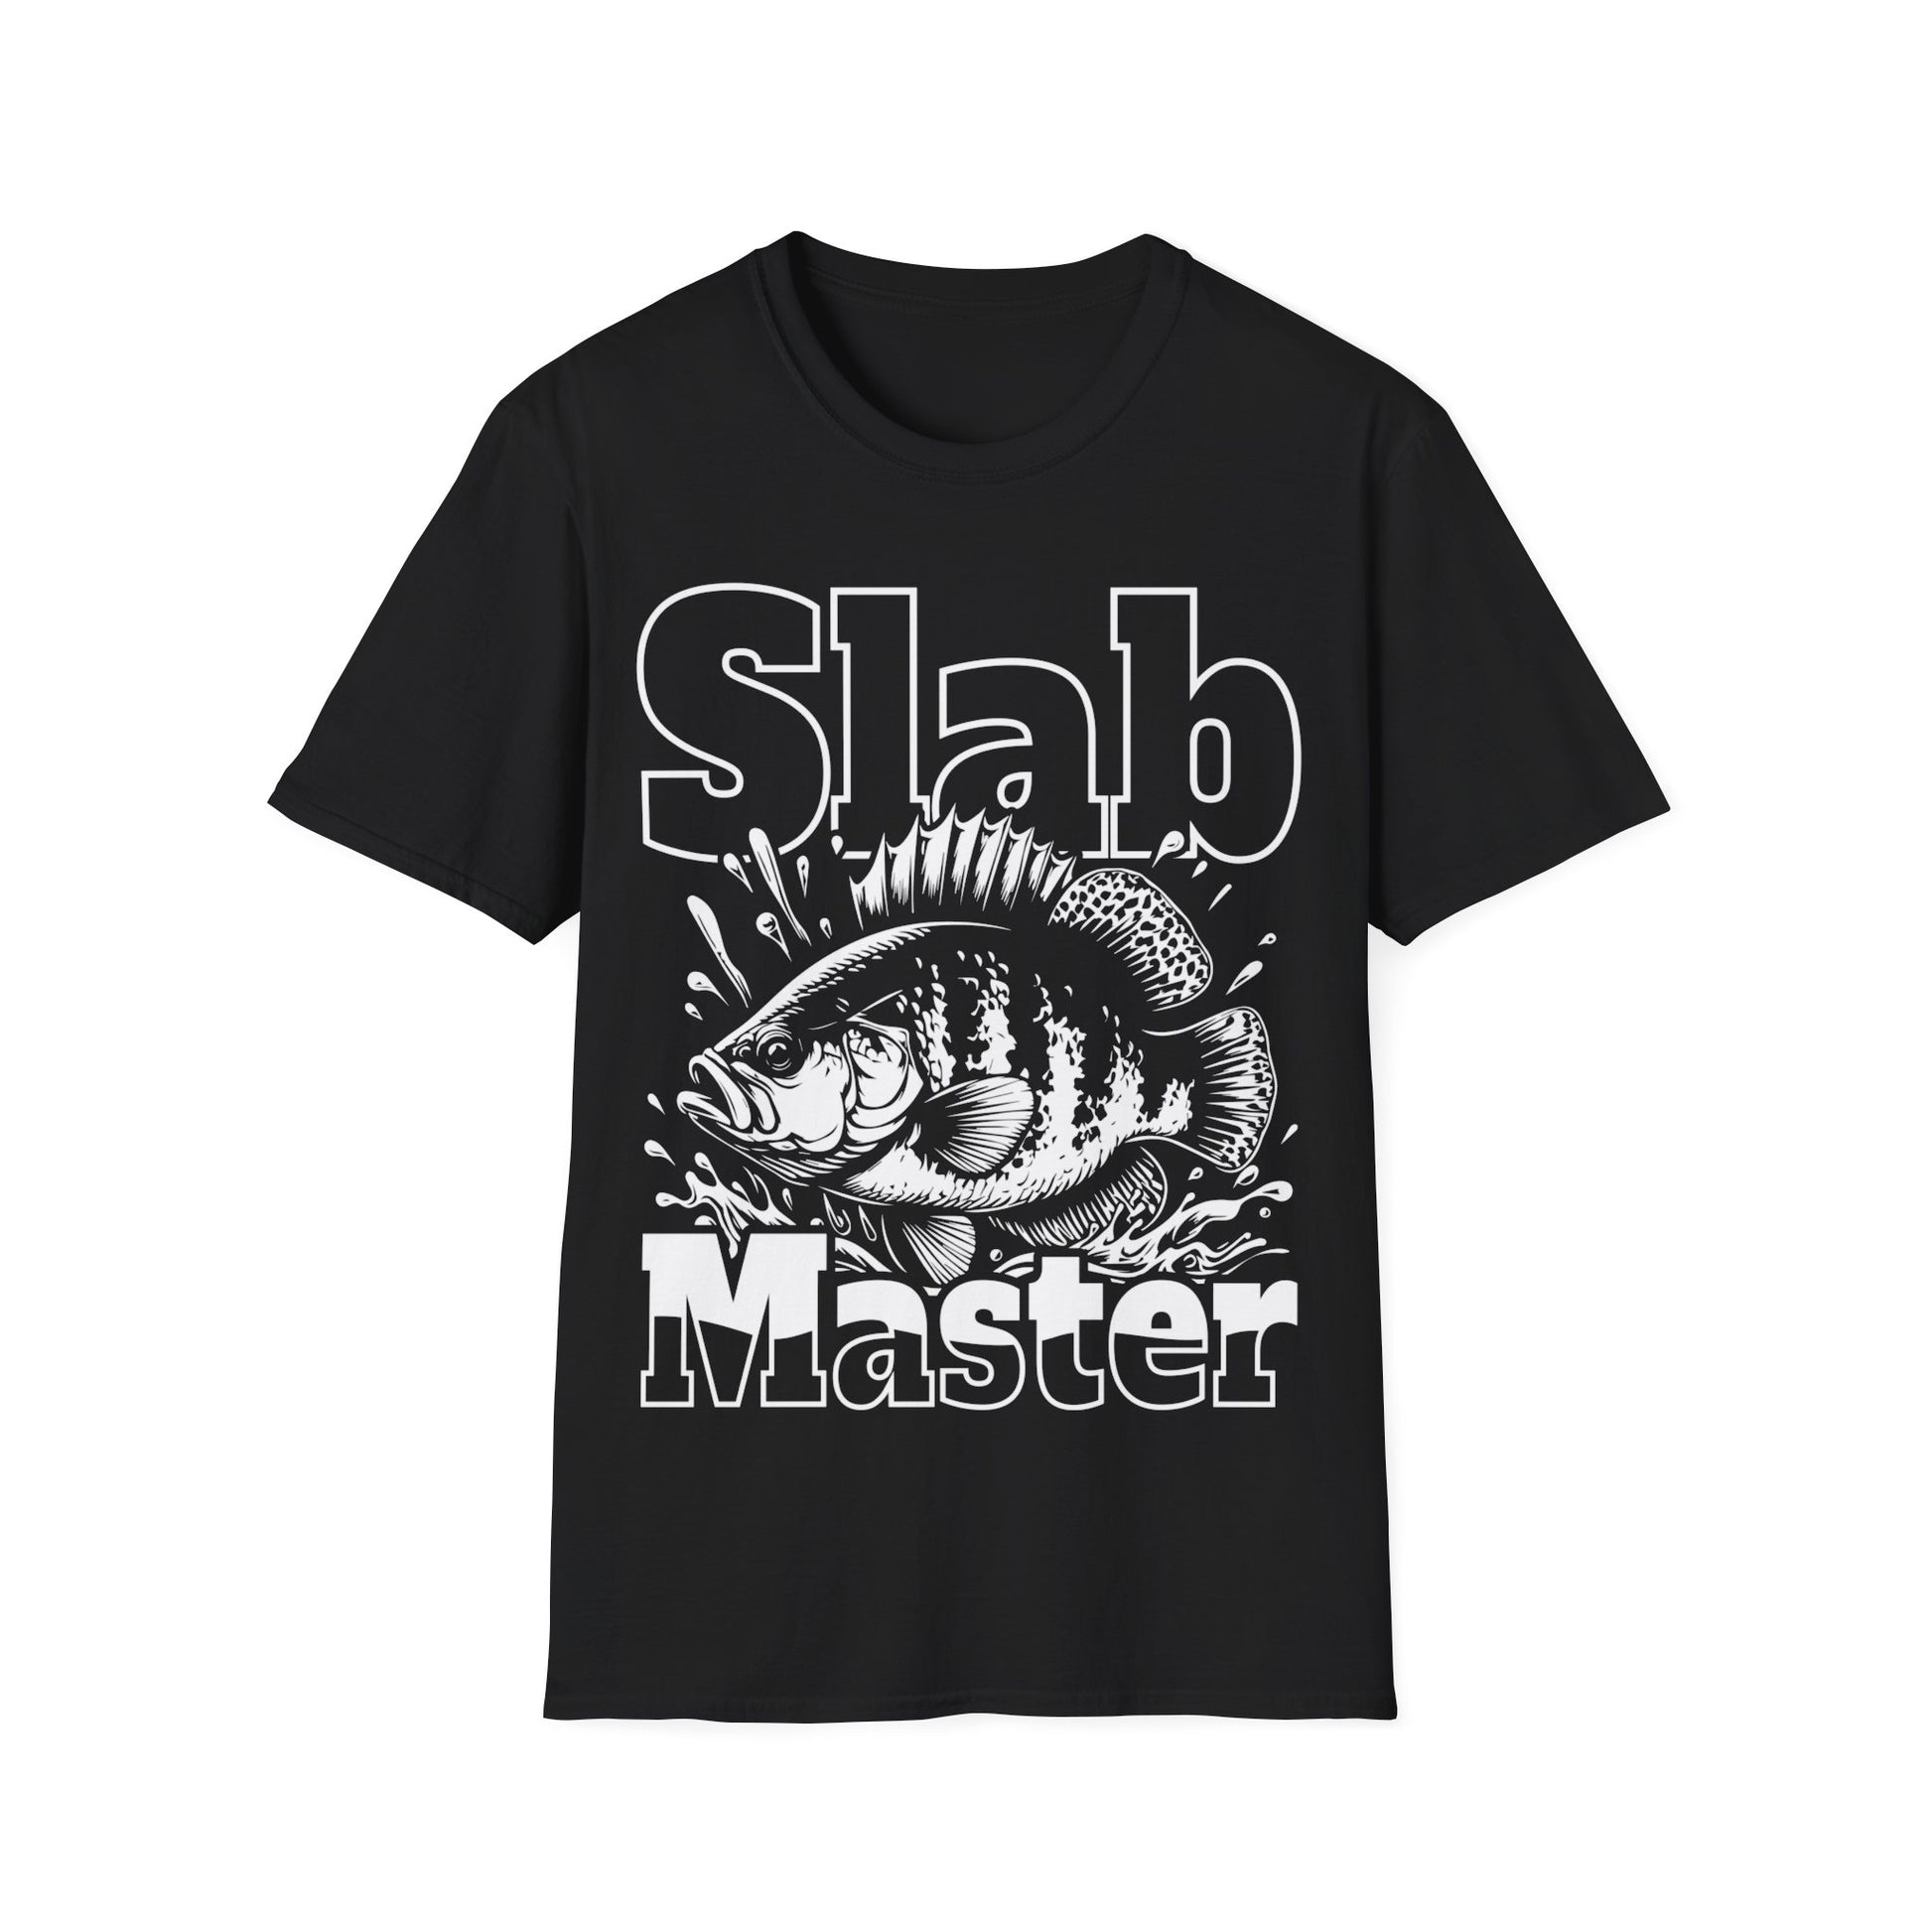 Slab Master Crappie Fishing T-Shirt – Crappie Co.